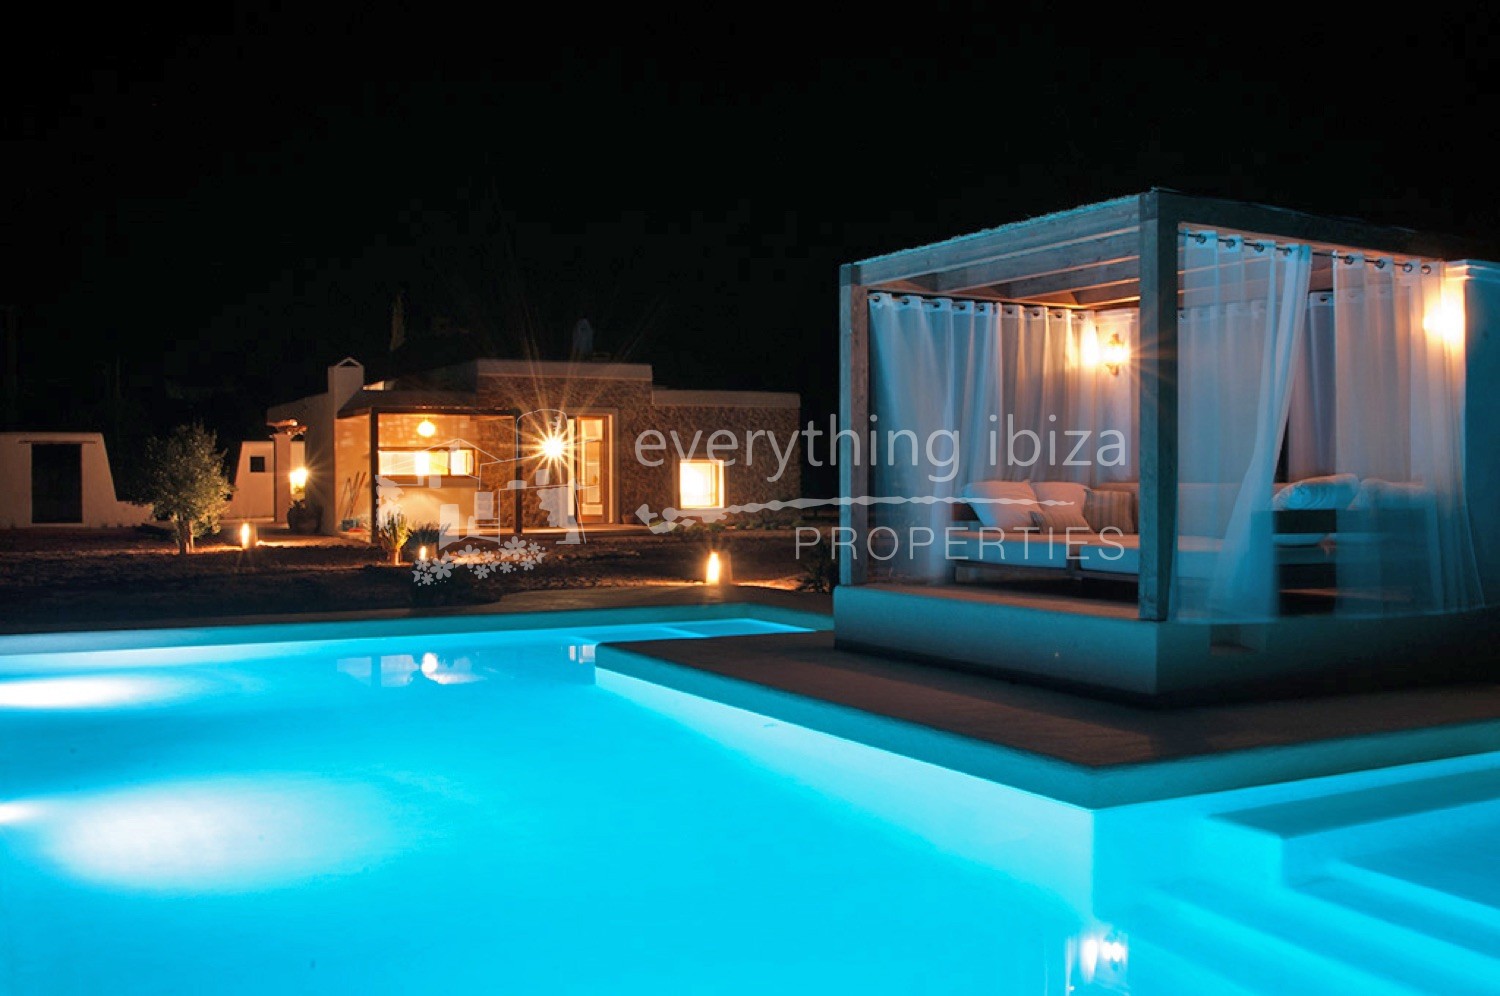 Beautifully Styled Ibiza Villa, ref. 1294, for sale in Ibiza by everything ibiza Properties